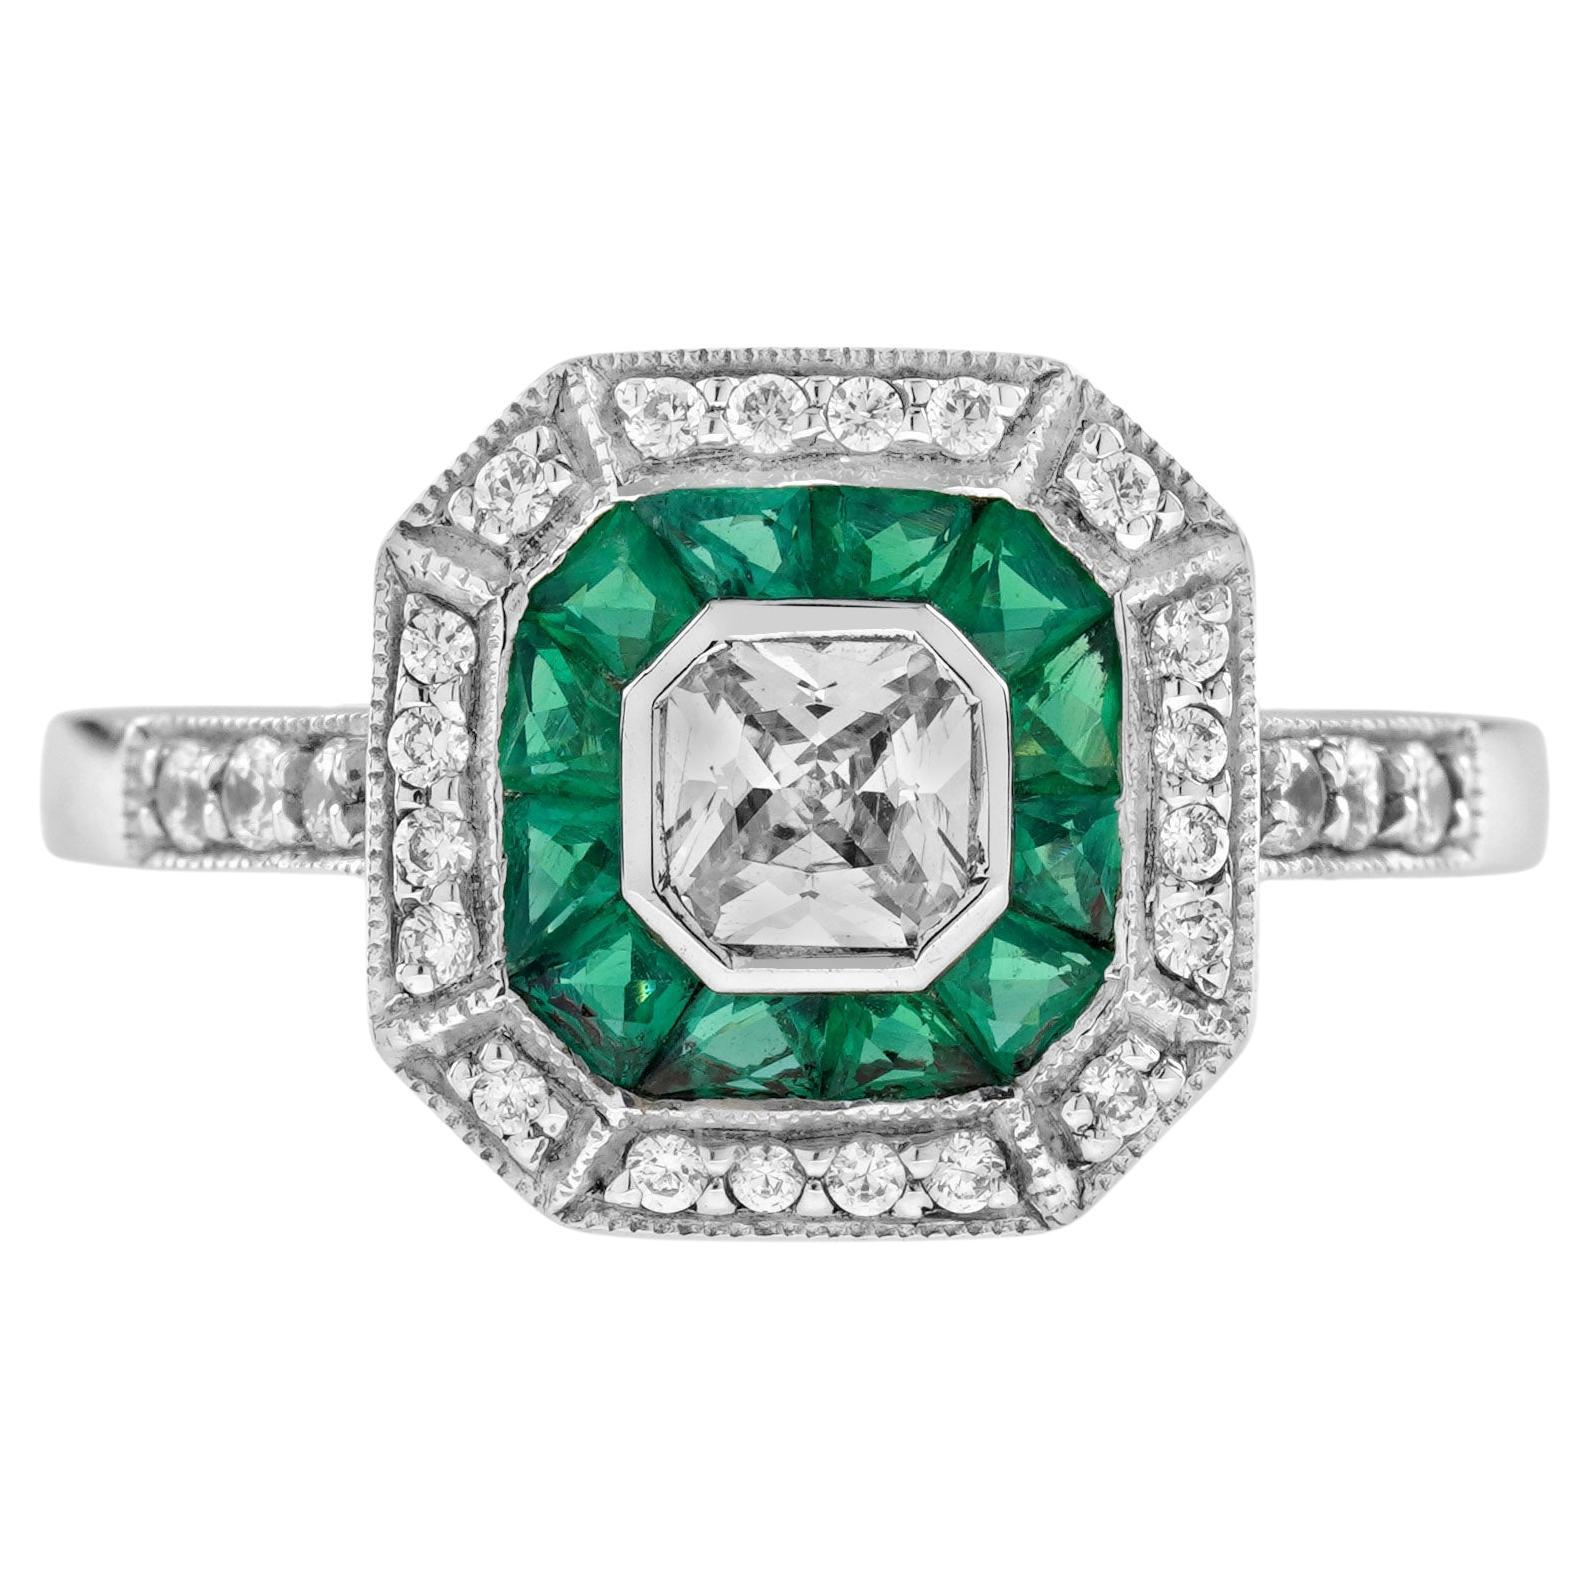 For Sale:  Diamond and Emerald Double Halo Art Deco Style Engagement Ring in 18K White Gold